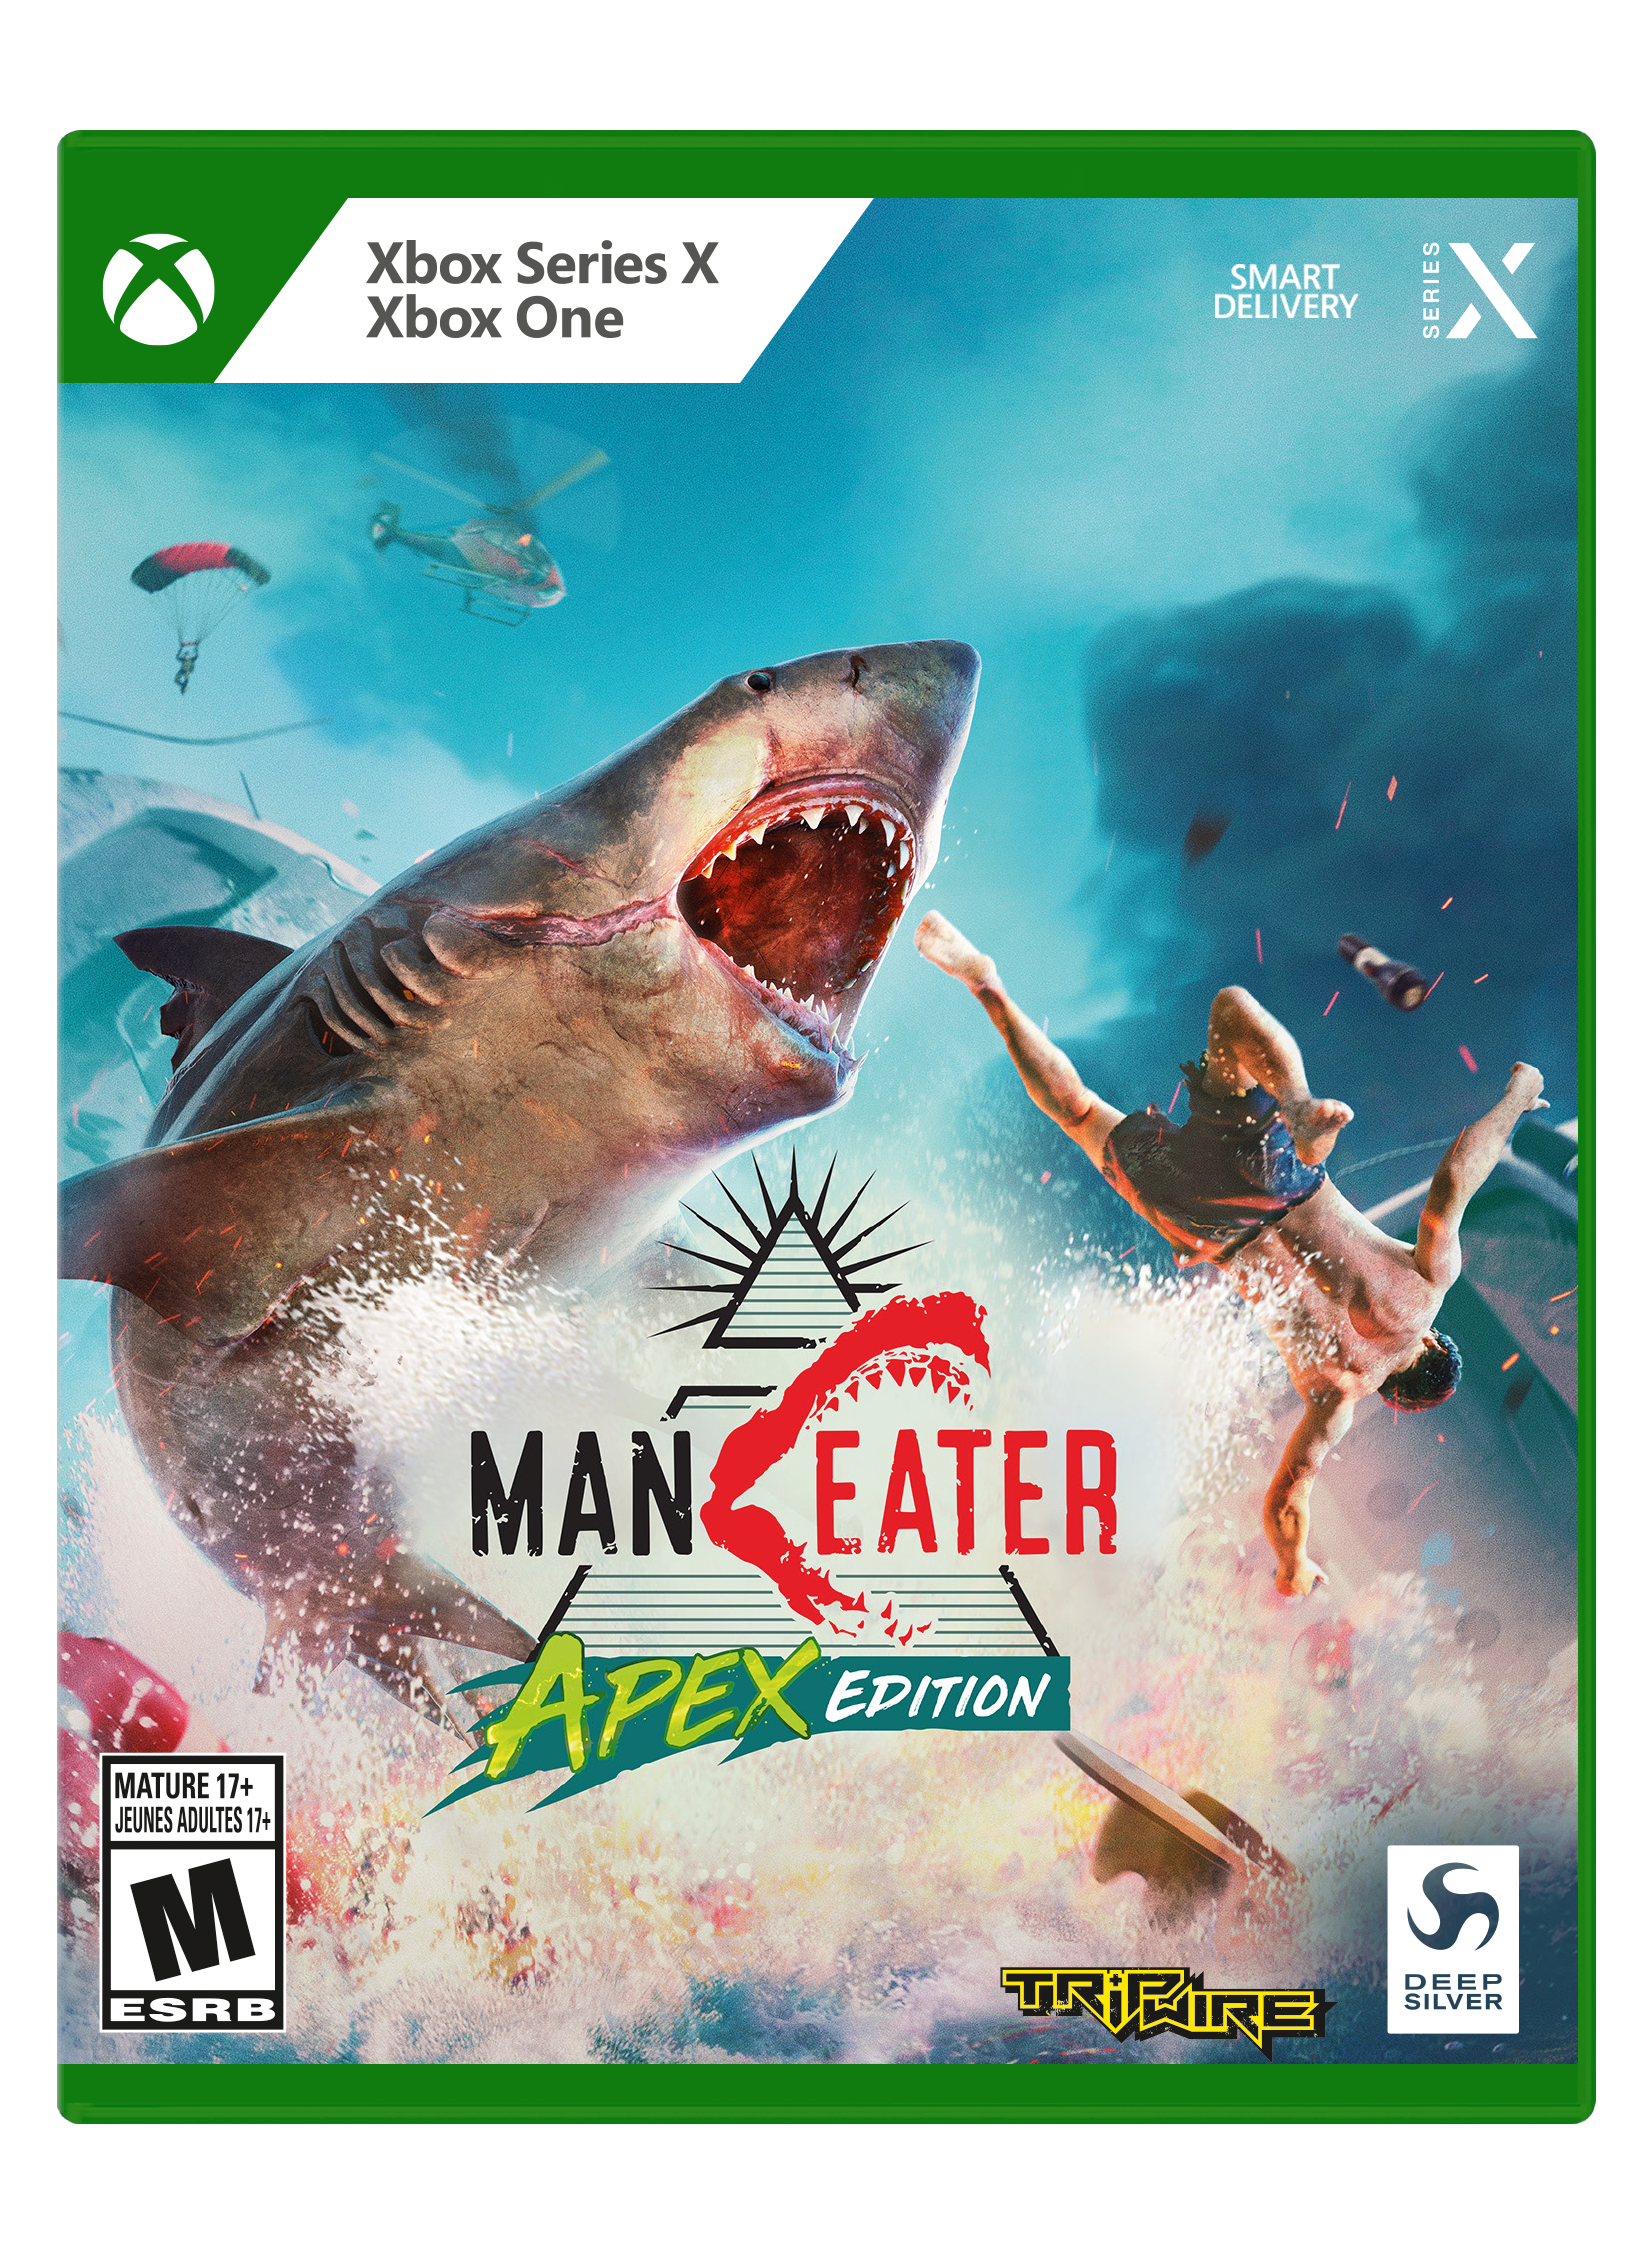 Gaming's First ShARkPG Out Now on PlayStation®4, Xbox One, and PC